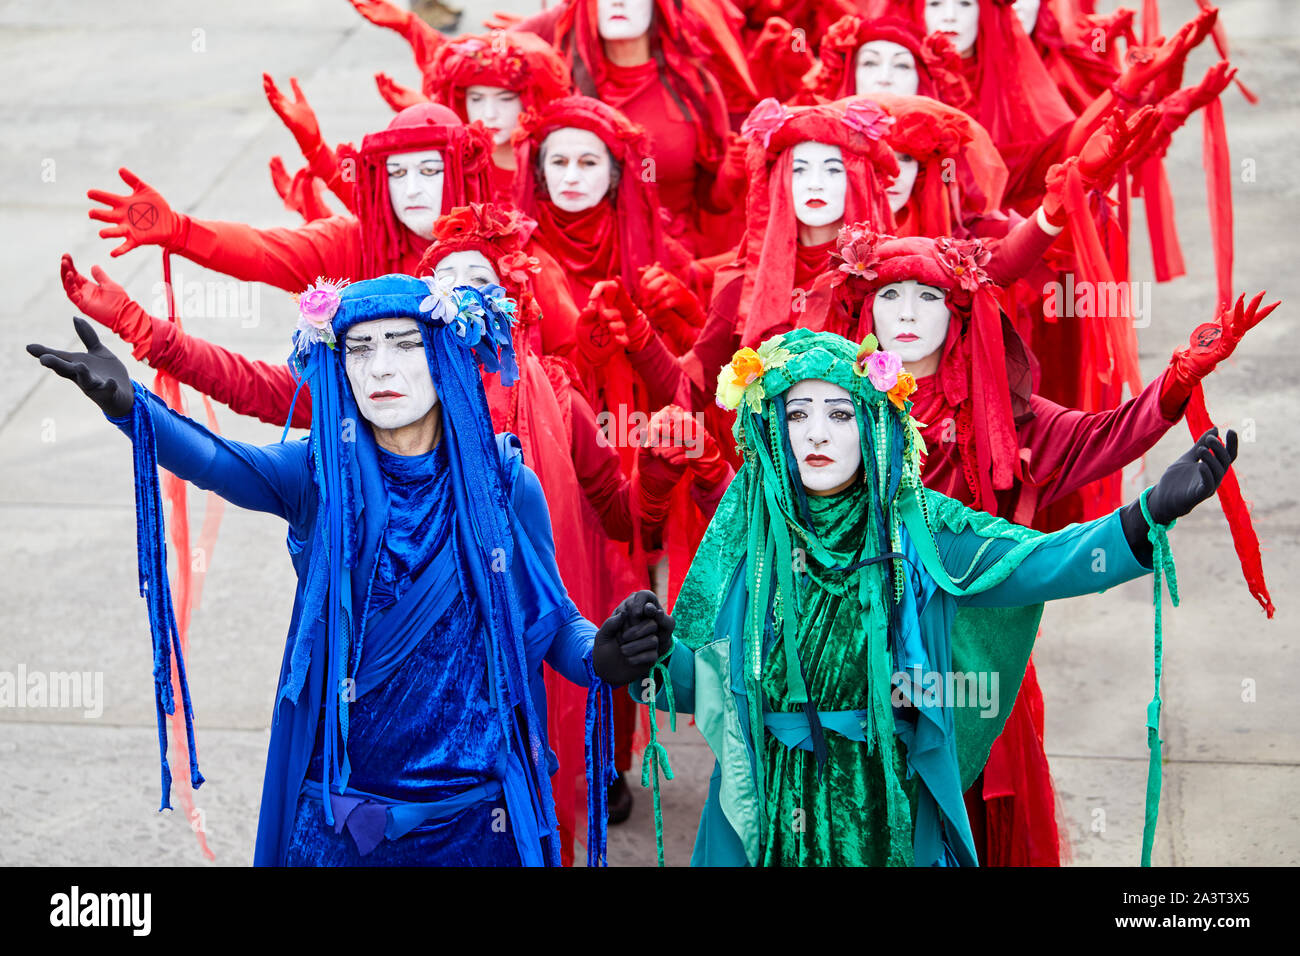 London, U.K. - Oct 9, 2019: Costumed environmental campaigners from Extinction Rebellion during a silent protest in Trafalgar Square on the third day of a planned two weeks of protests. Stock Photo